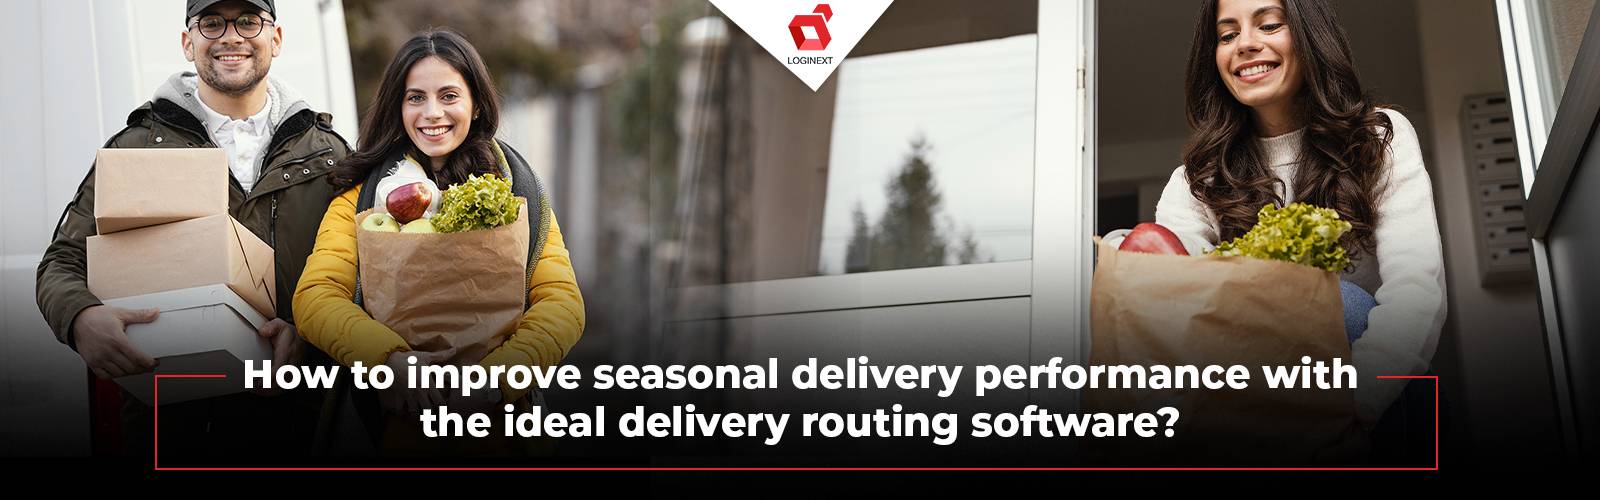 Improve seasonal deliveries with delivery routing software?